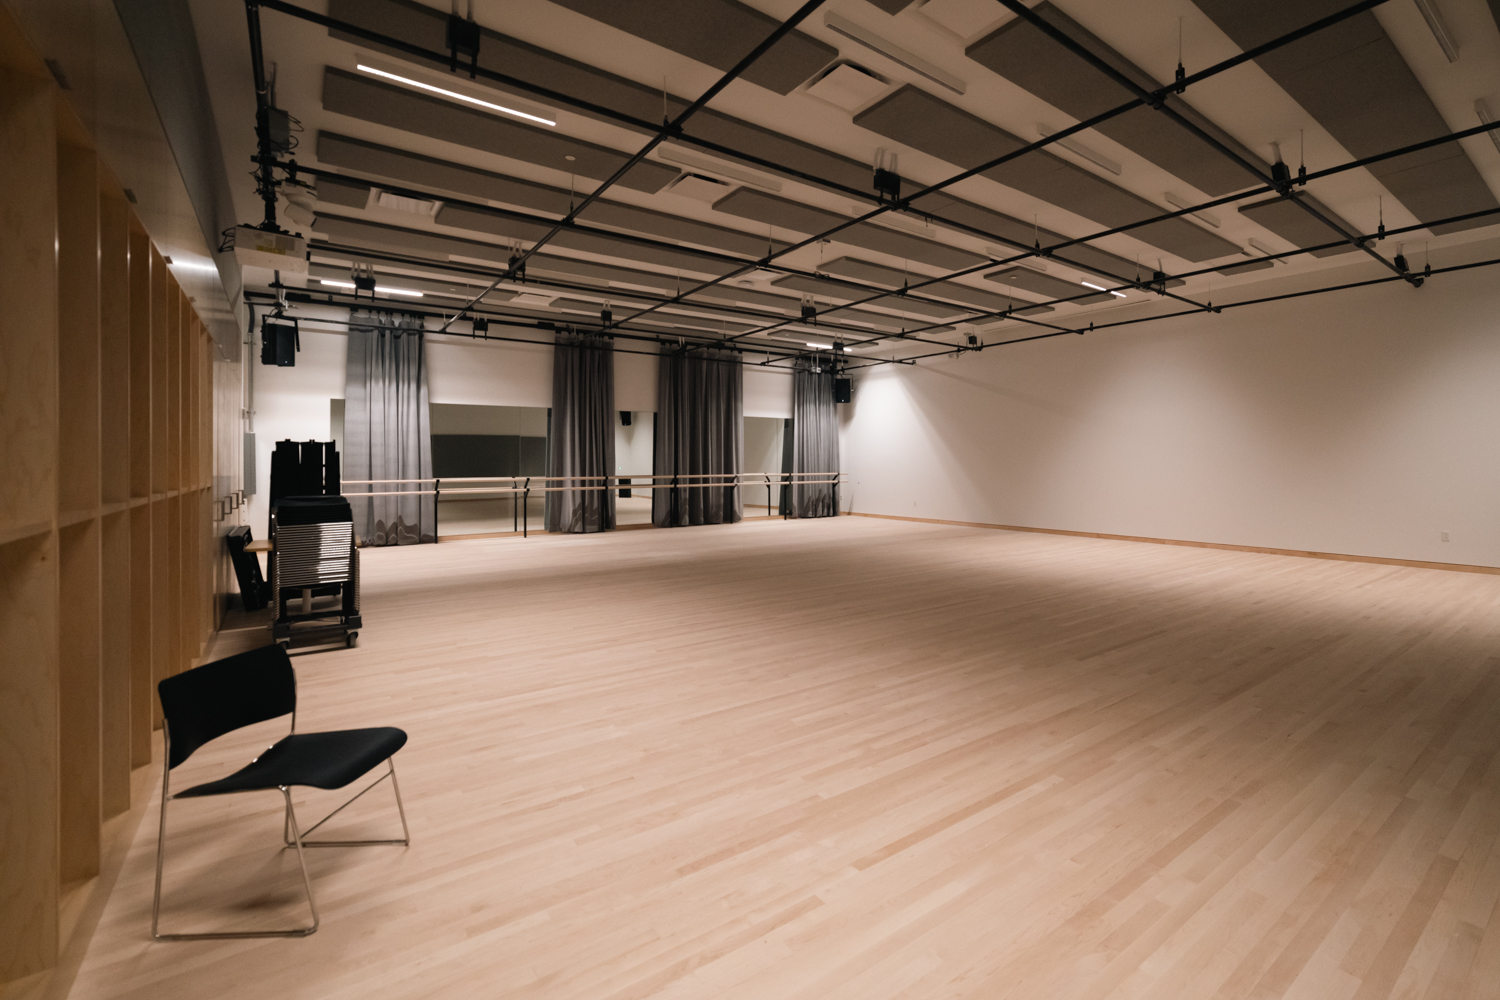 An empty rehearsal room with wooden floors and a wall of floor to ceiling mirrors. There are gray curtains and a stack of chairs in front of the mirrors.